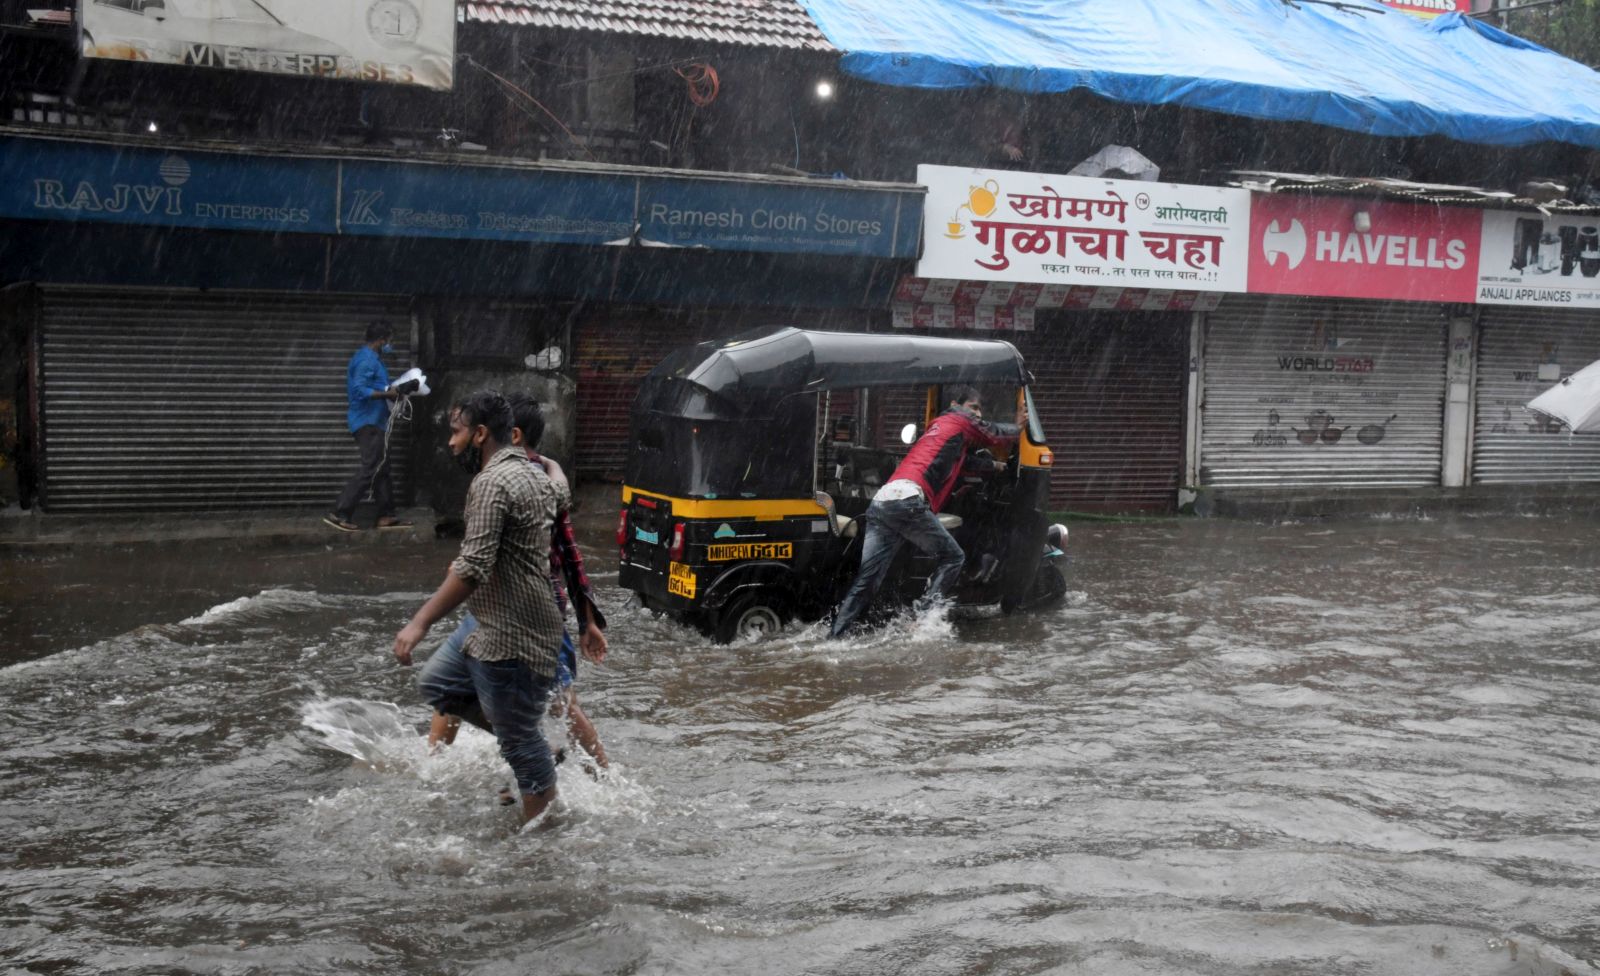 epa09207304 Indian people wade through flooded street during heavy rainfall after cyclone Tauktae hits Mumbai and nearby areas, India, 17 May 2021. According to the India Meteorological Department (IMD) forecast, Cyclone Tauktae will make a landfall over the Gujarat coastal area, including Kerala, Karnataka, Maharashtra and Goa with a wind speed of around 150 kmph.  EPA/STR